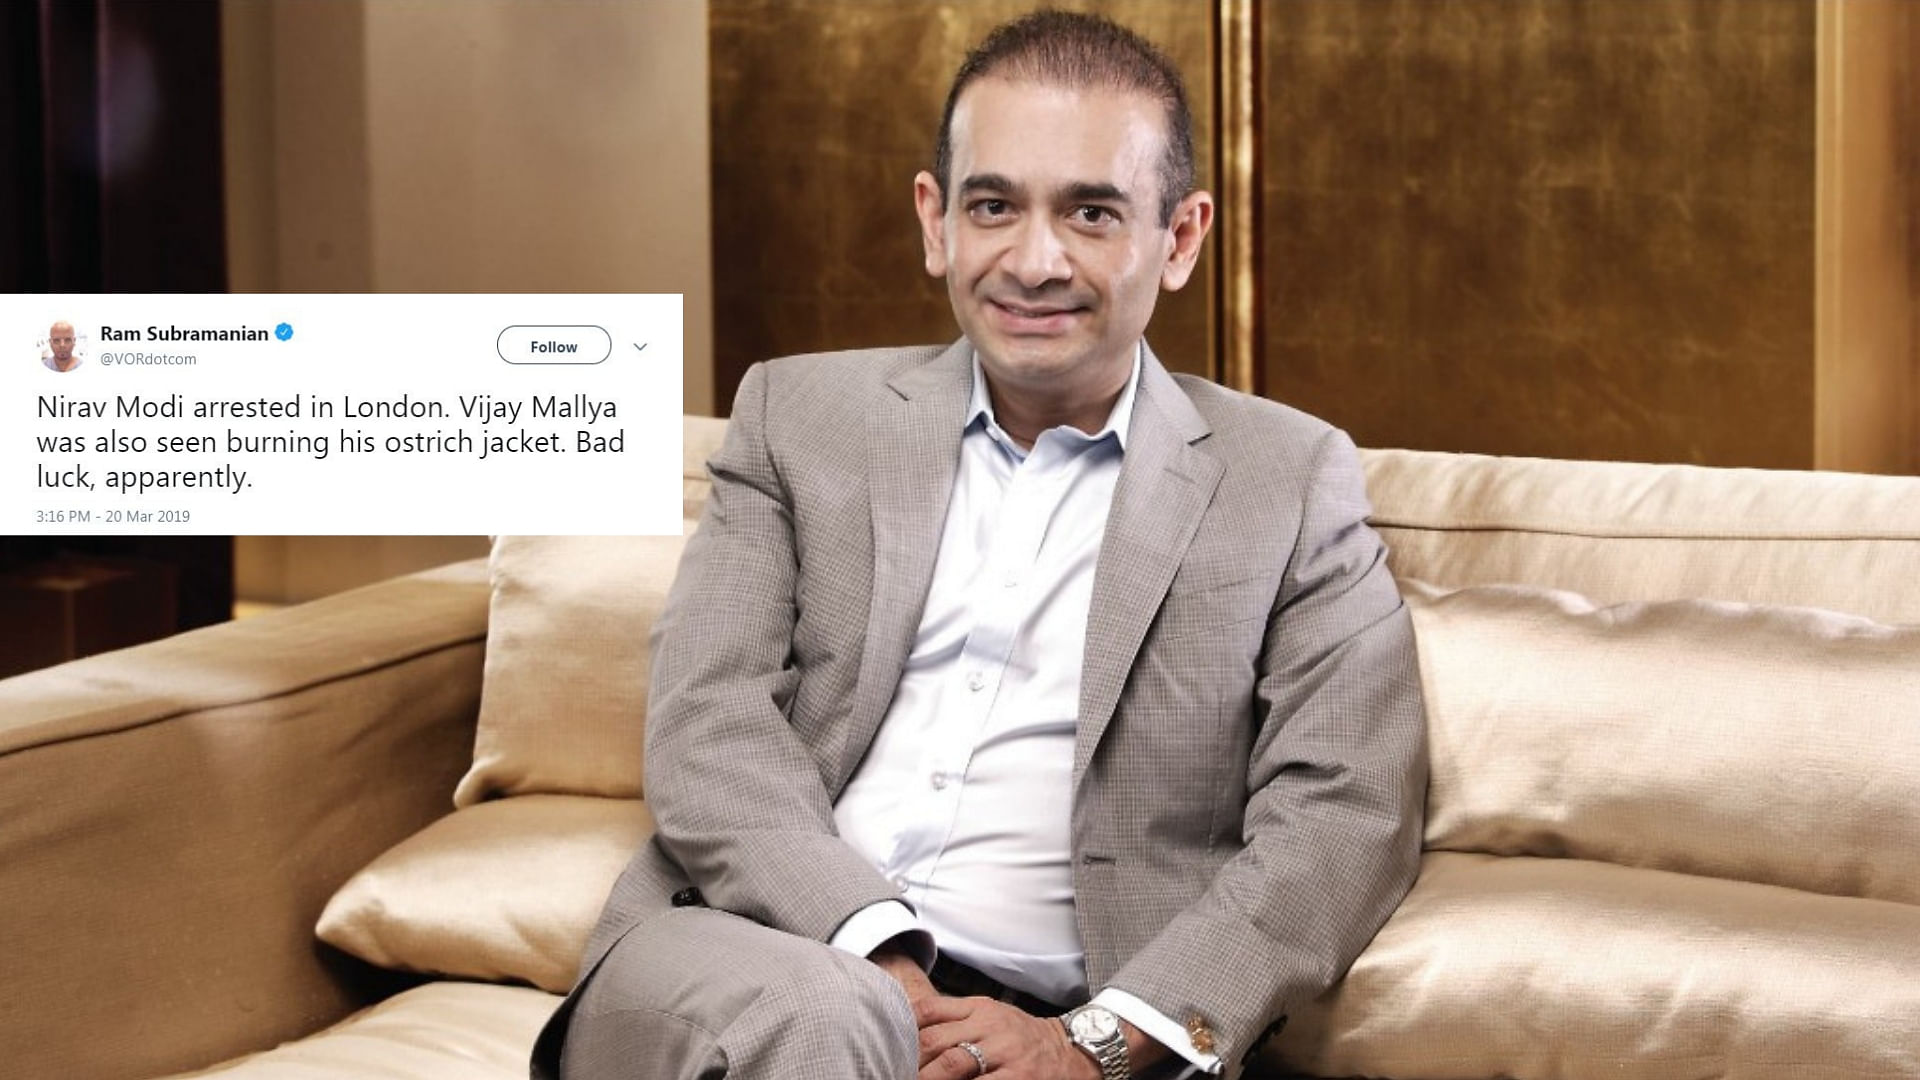 After Nirav Modi’s arrest, his bail plea was rejected by a London court on Wednesday and he is to remain in custody till 29 March.